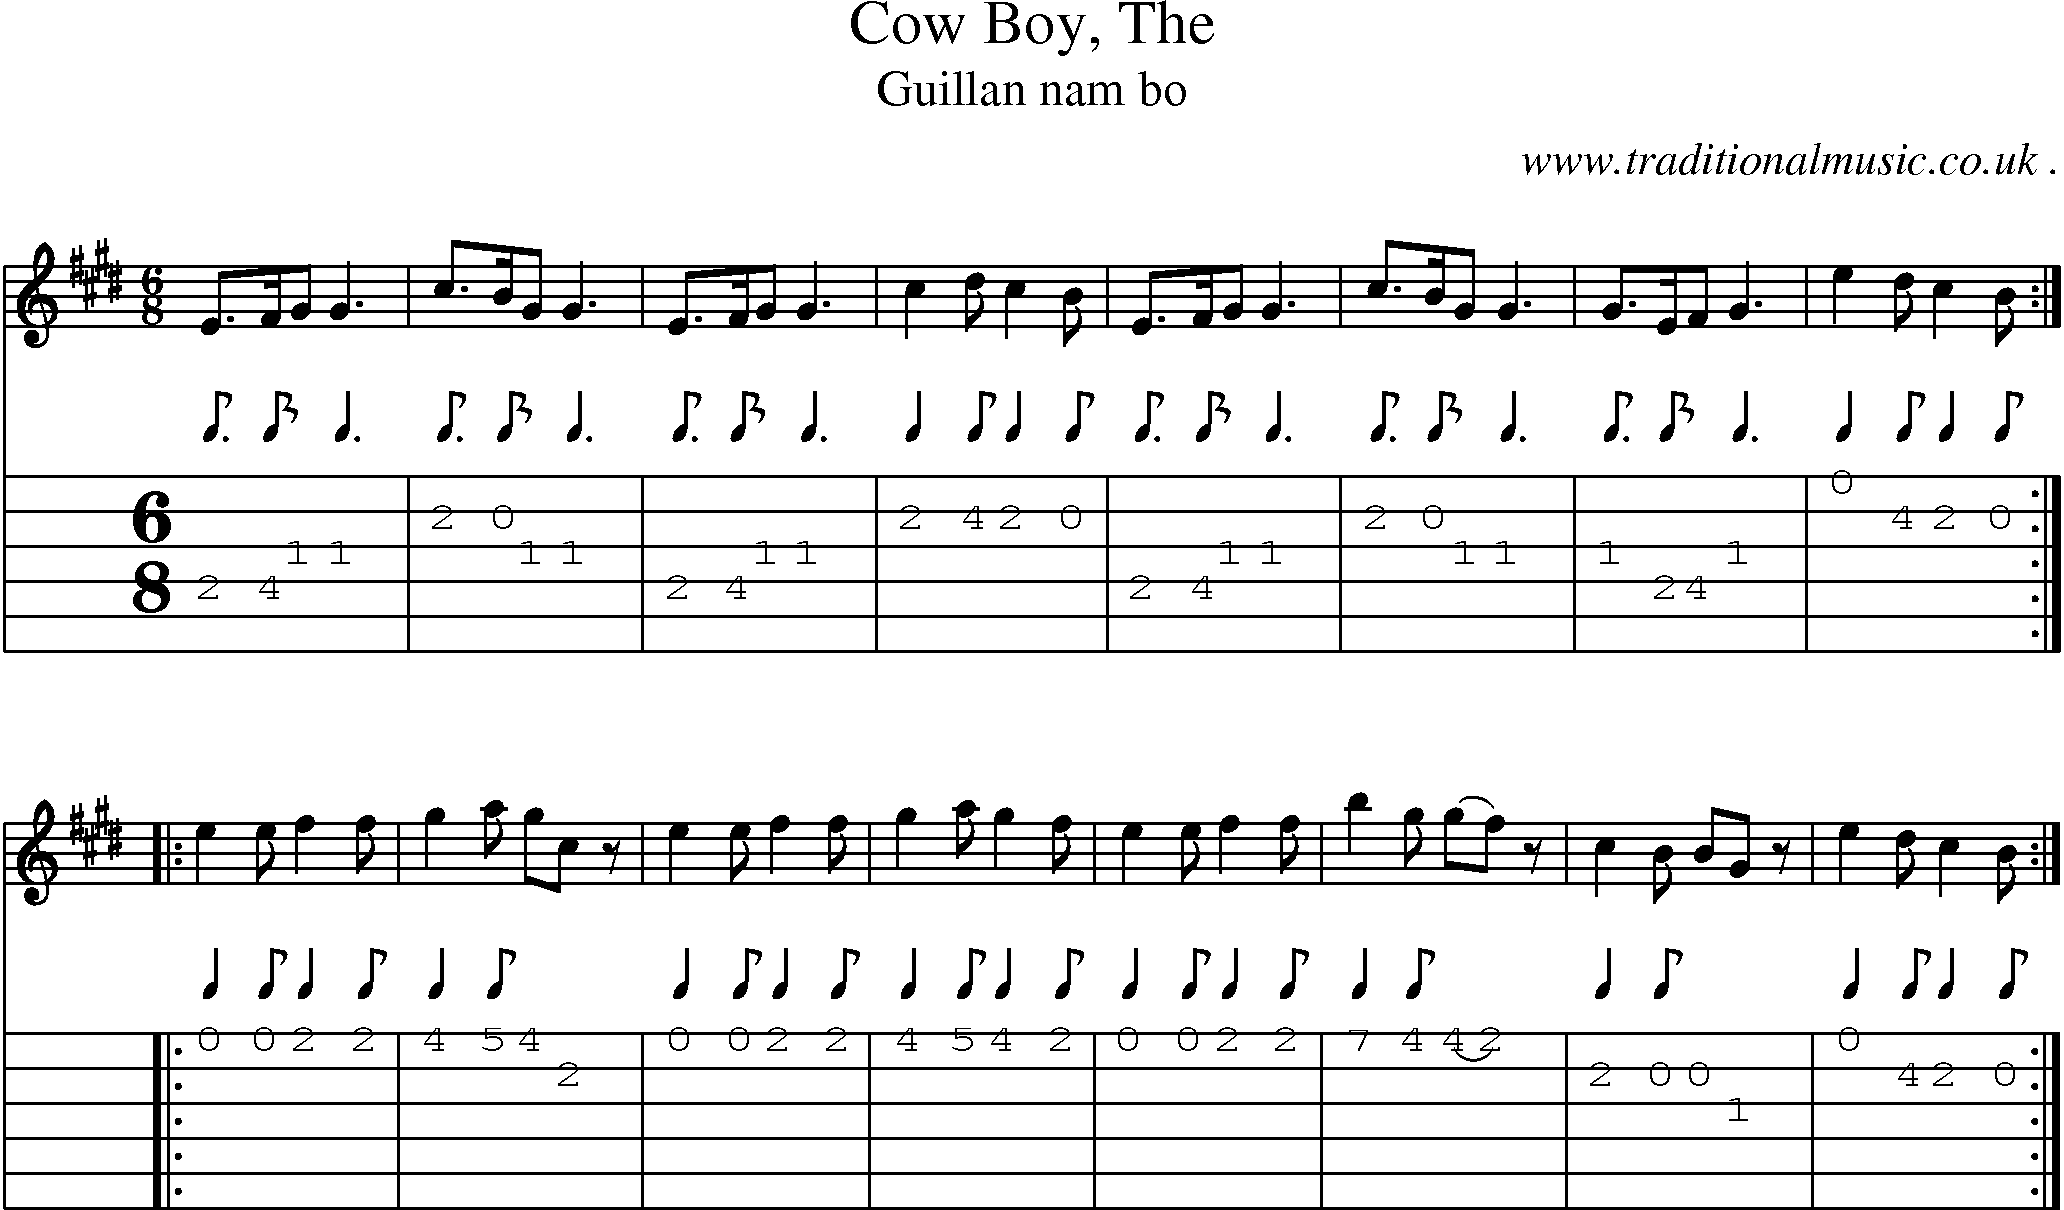 Sheet-music  score, Chords and Guitar Tabs for Cow Boy The